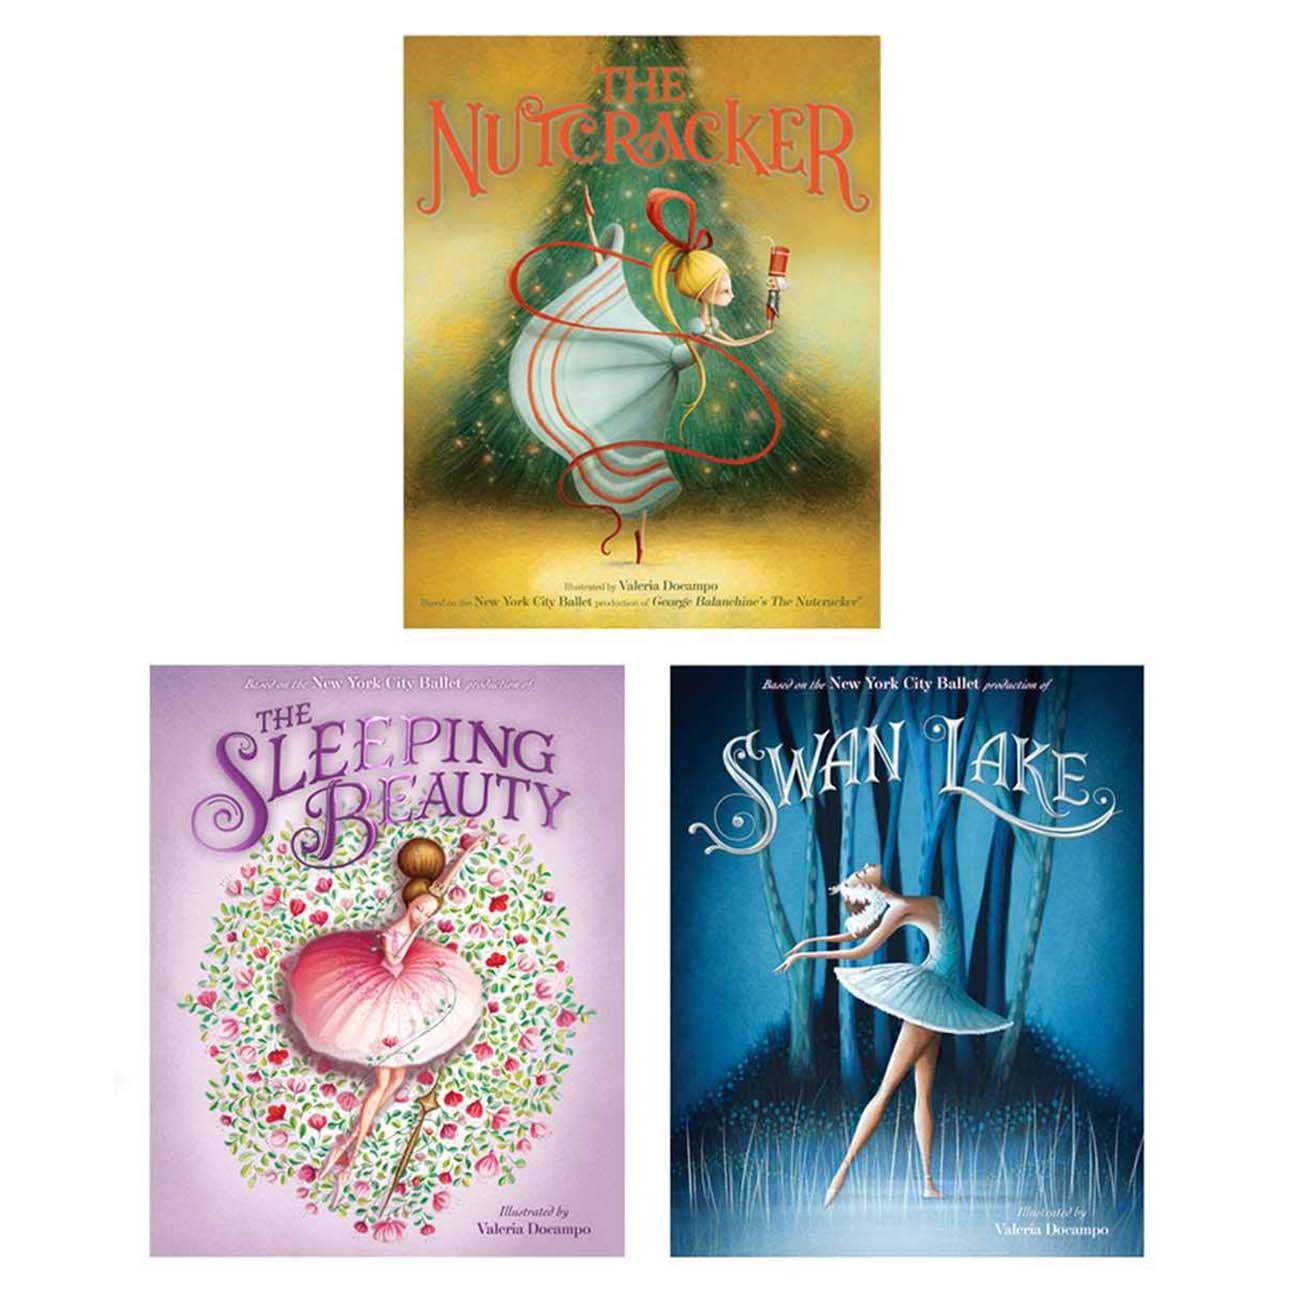 Met Opera Shop | A Classic Picture Book Collection: The Nutcracker; The  Sleeping Beauty; Swan Lake (Hardcover)